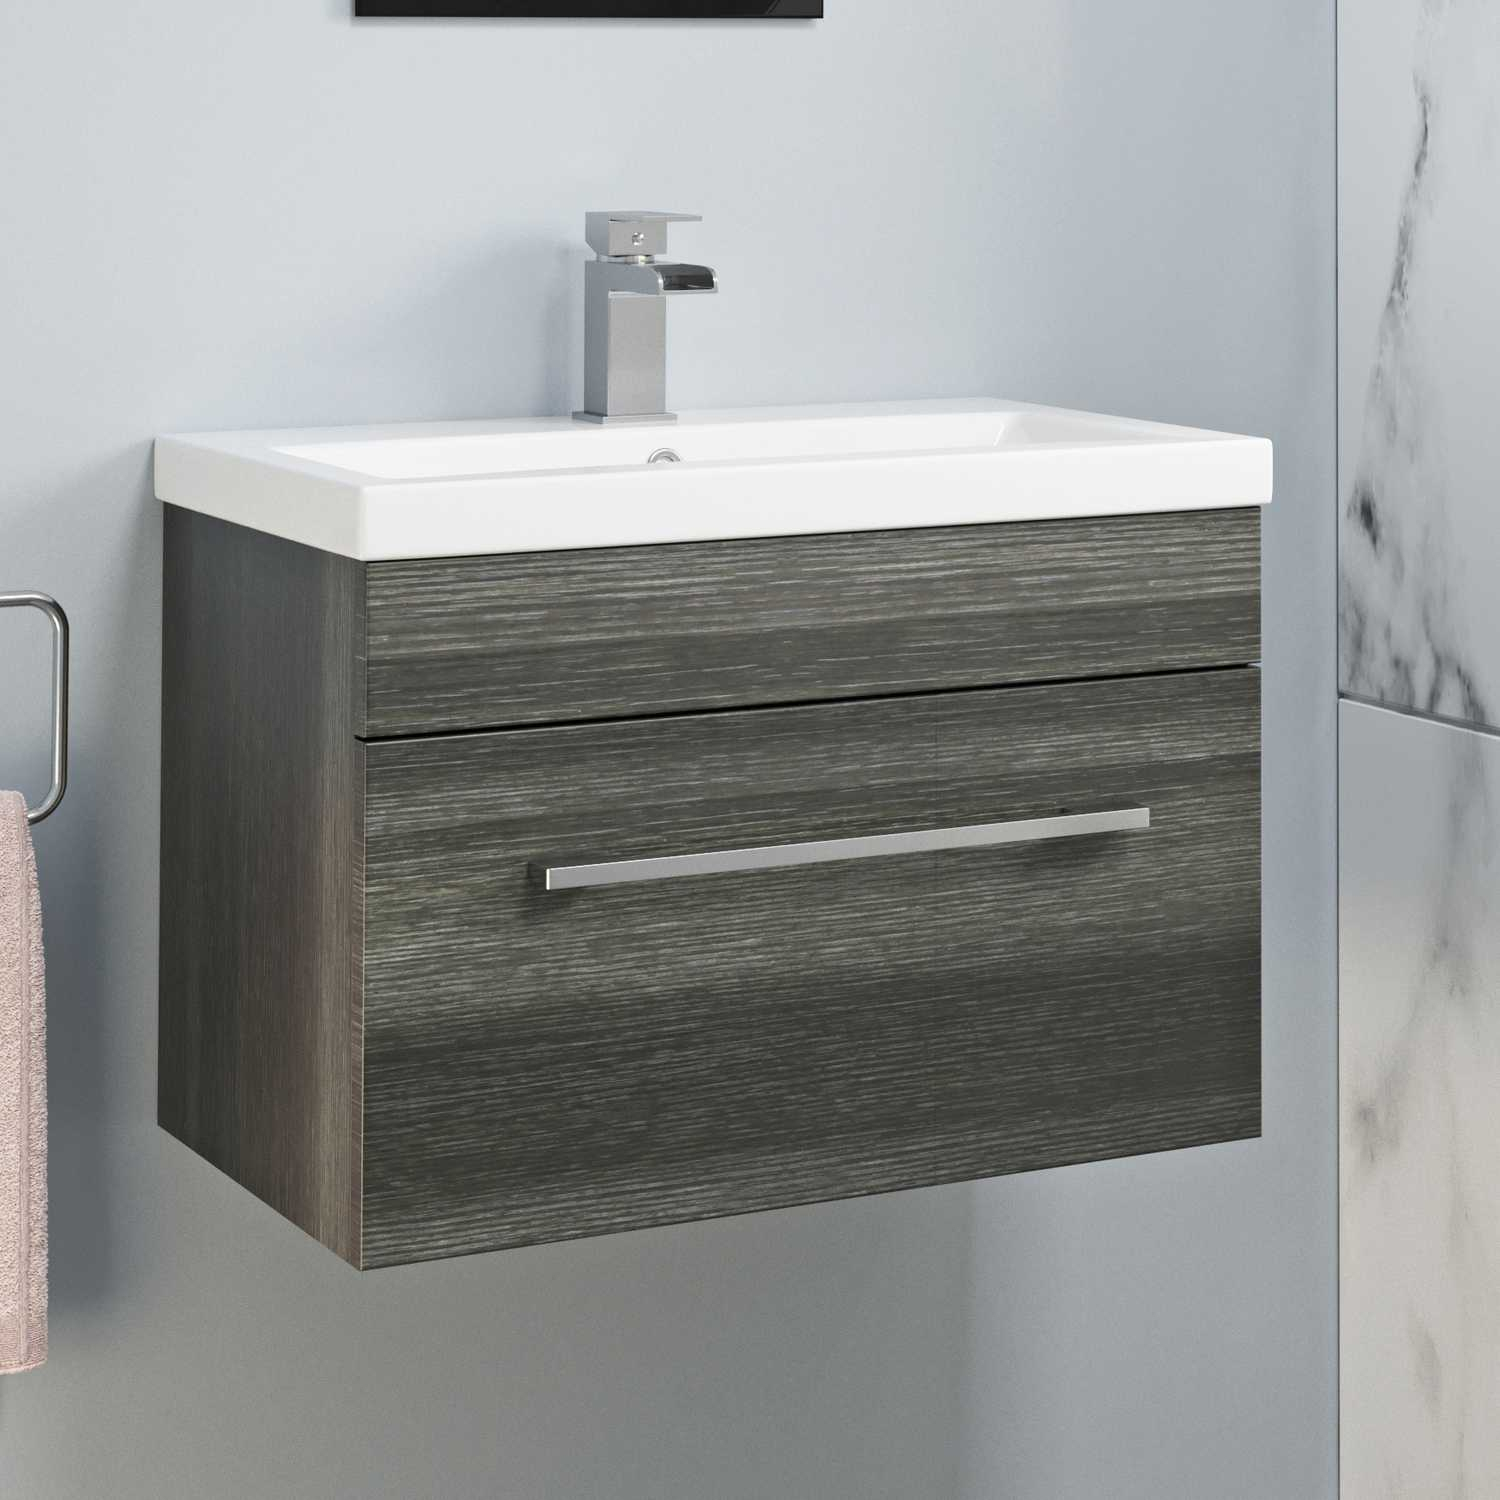 600mm Bathroom Wall Hung Vanity Unit Basin Storage Cabinet Furniture throughout sizing 1500 X 1500